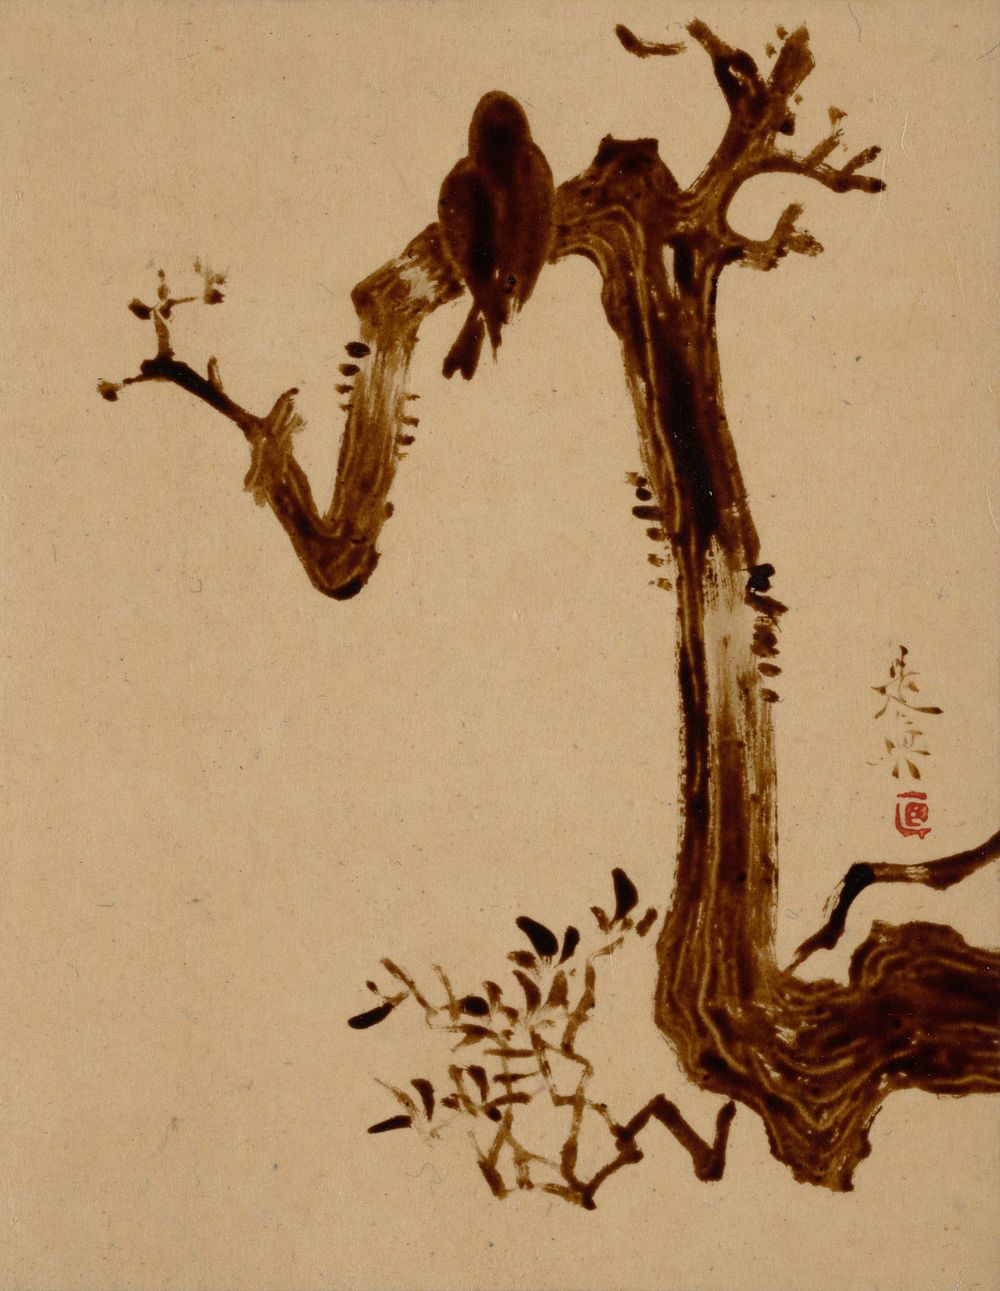 Crow on Tree. Original public domain image from the MET museum.